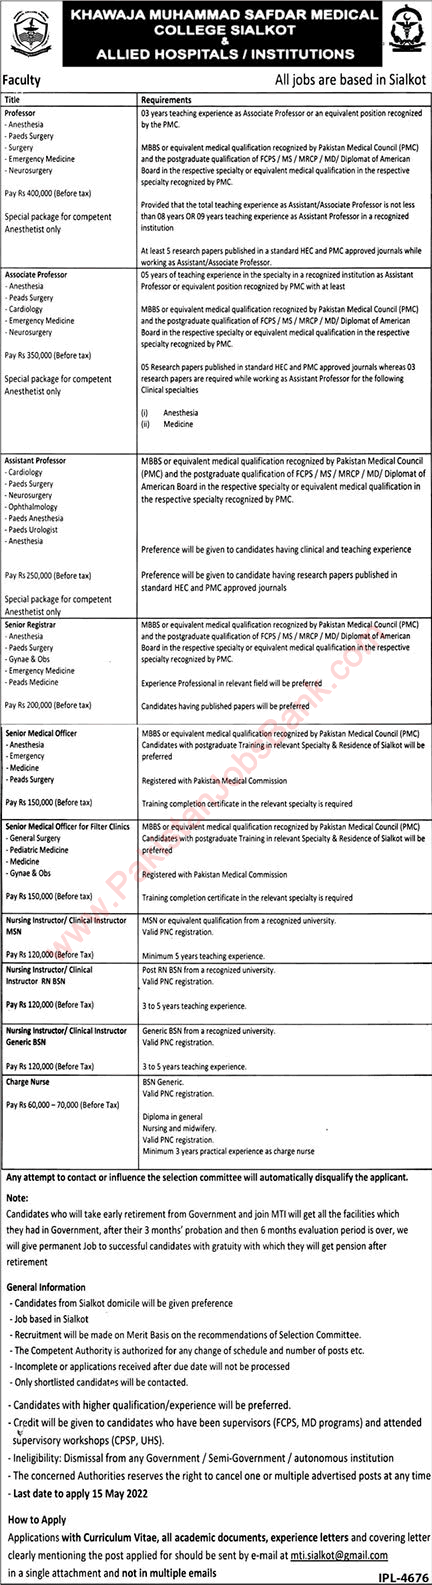 Khawaja Muhammad Safdar Medical College and Allied Institutions Sialkot Jobs May 2022 Teaching Faculty & Others Latest